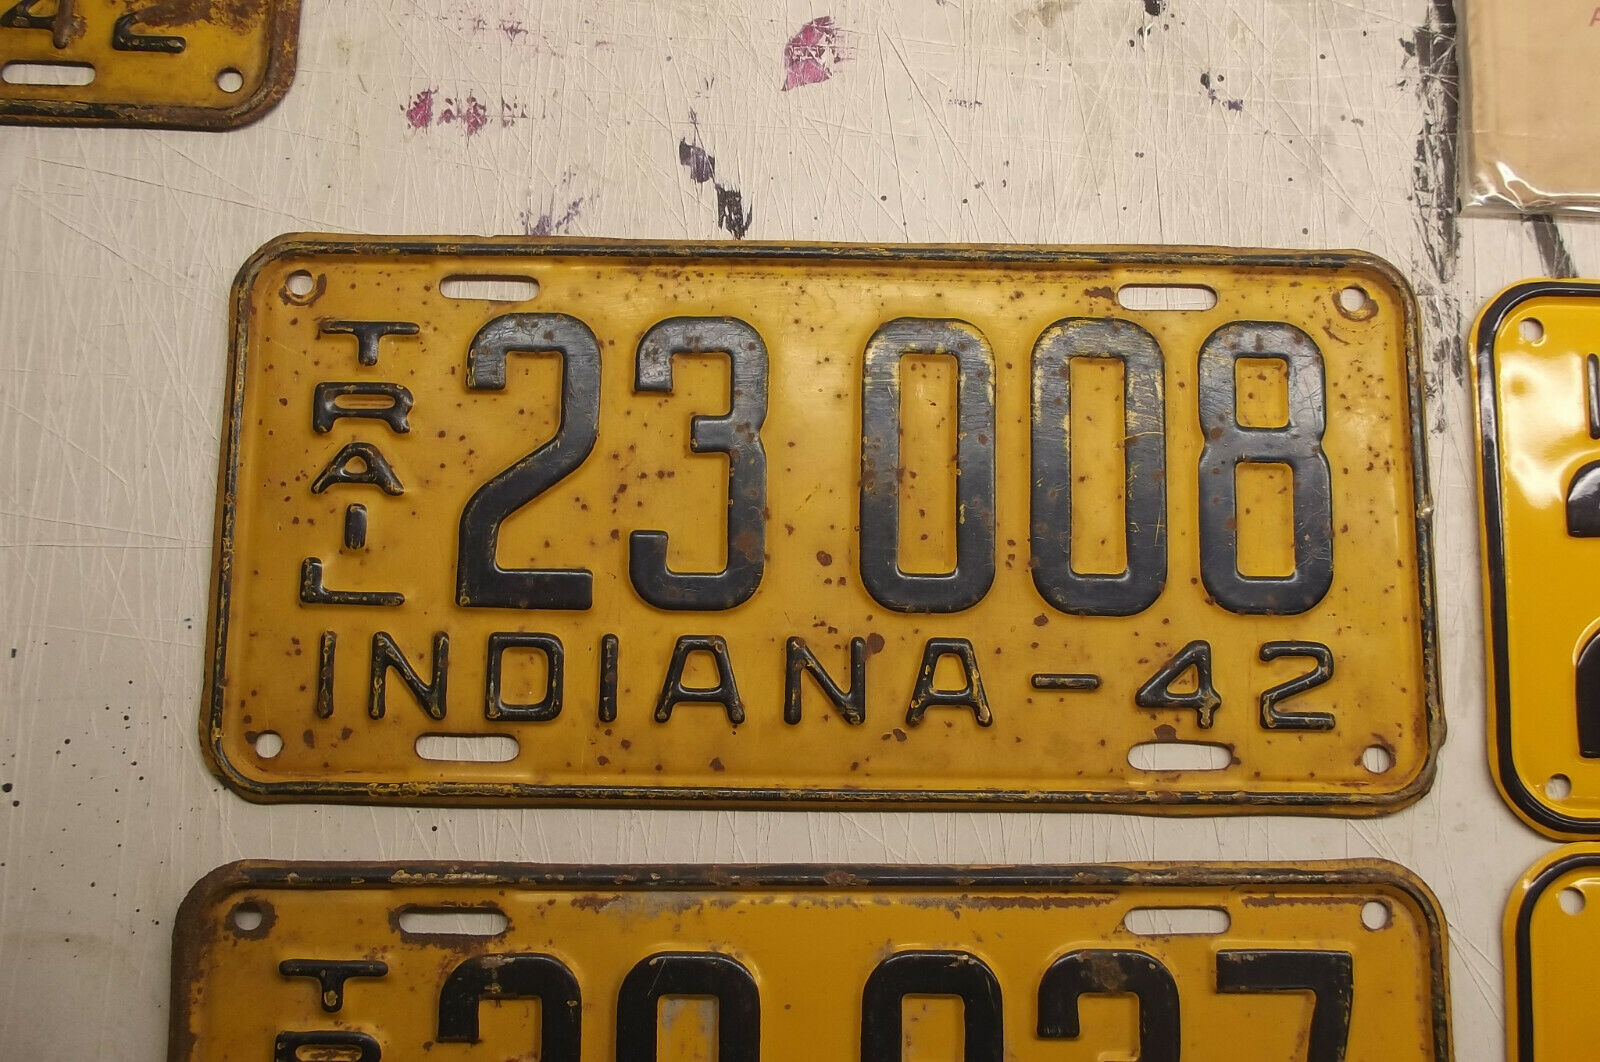 1942 INDIANA LICENSE PLATE TRAILER 23008 FROM ESTATE COLLECTION